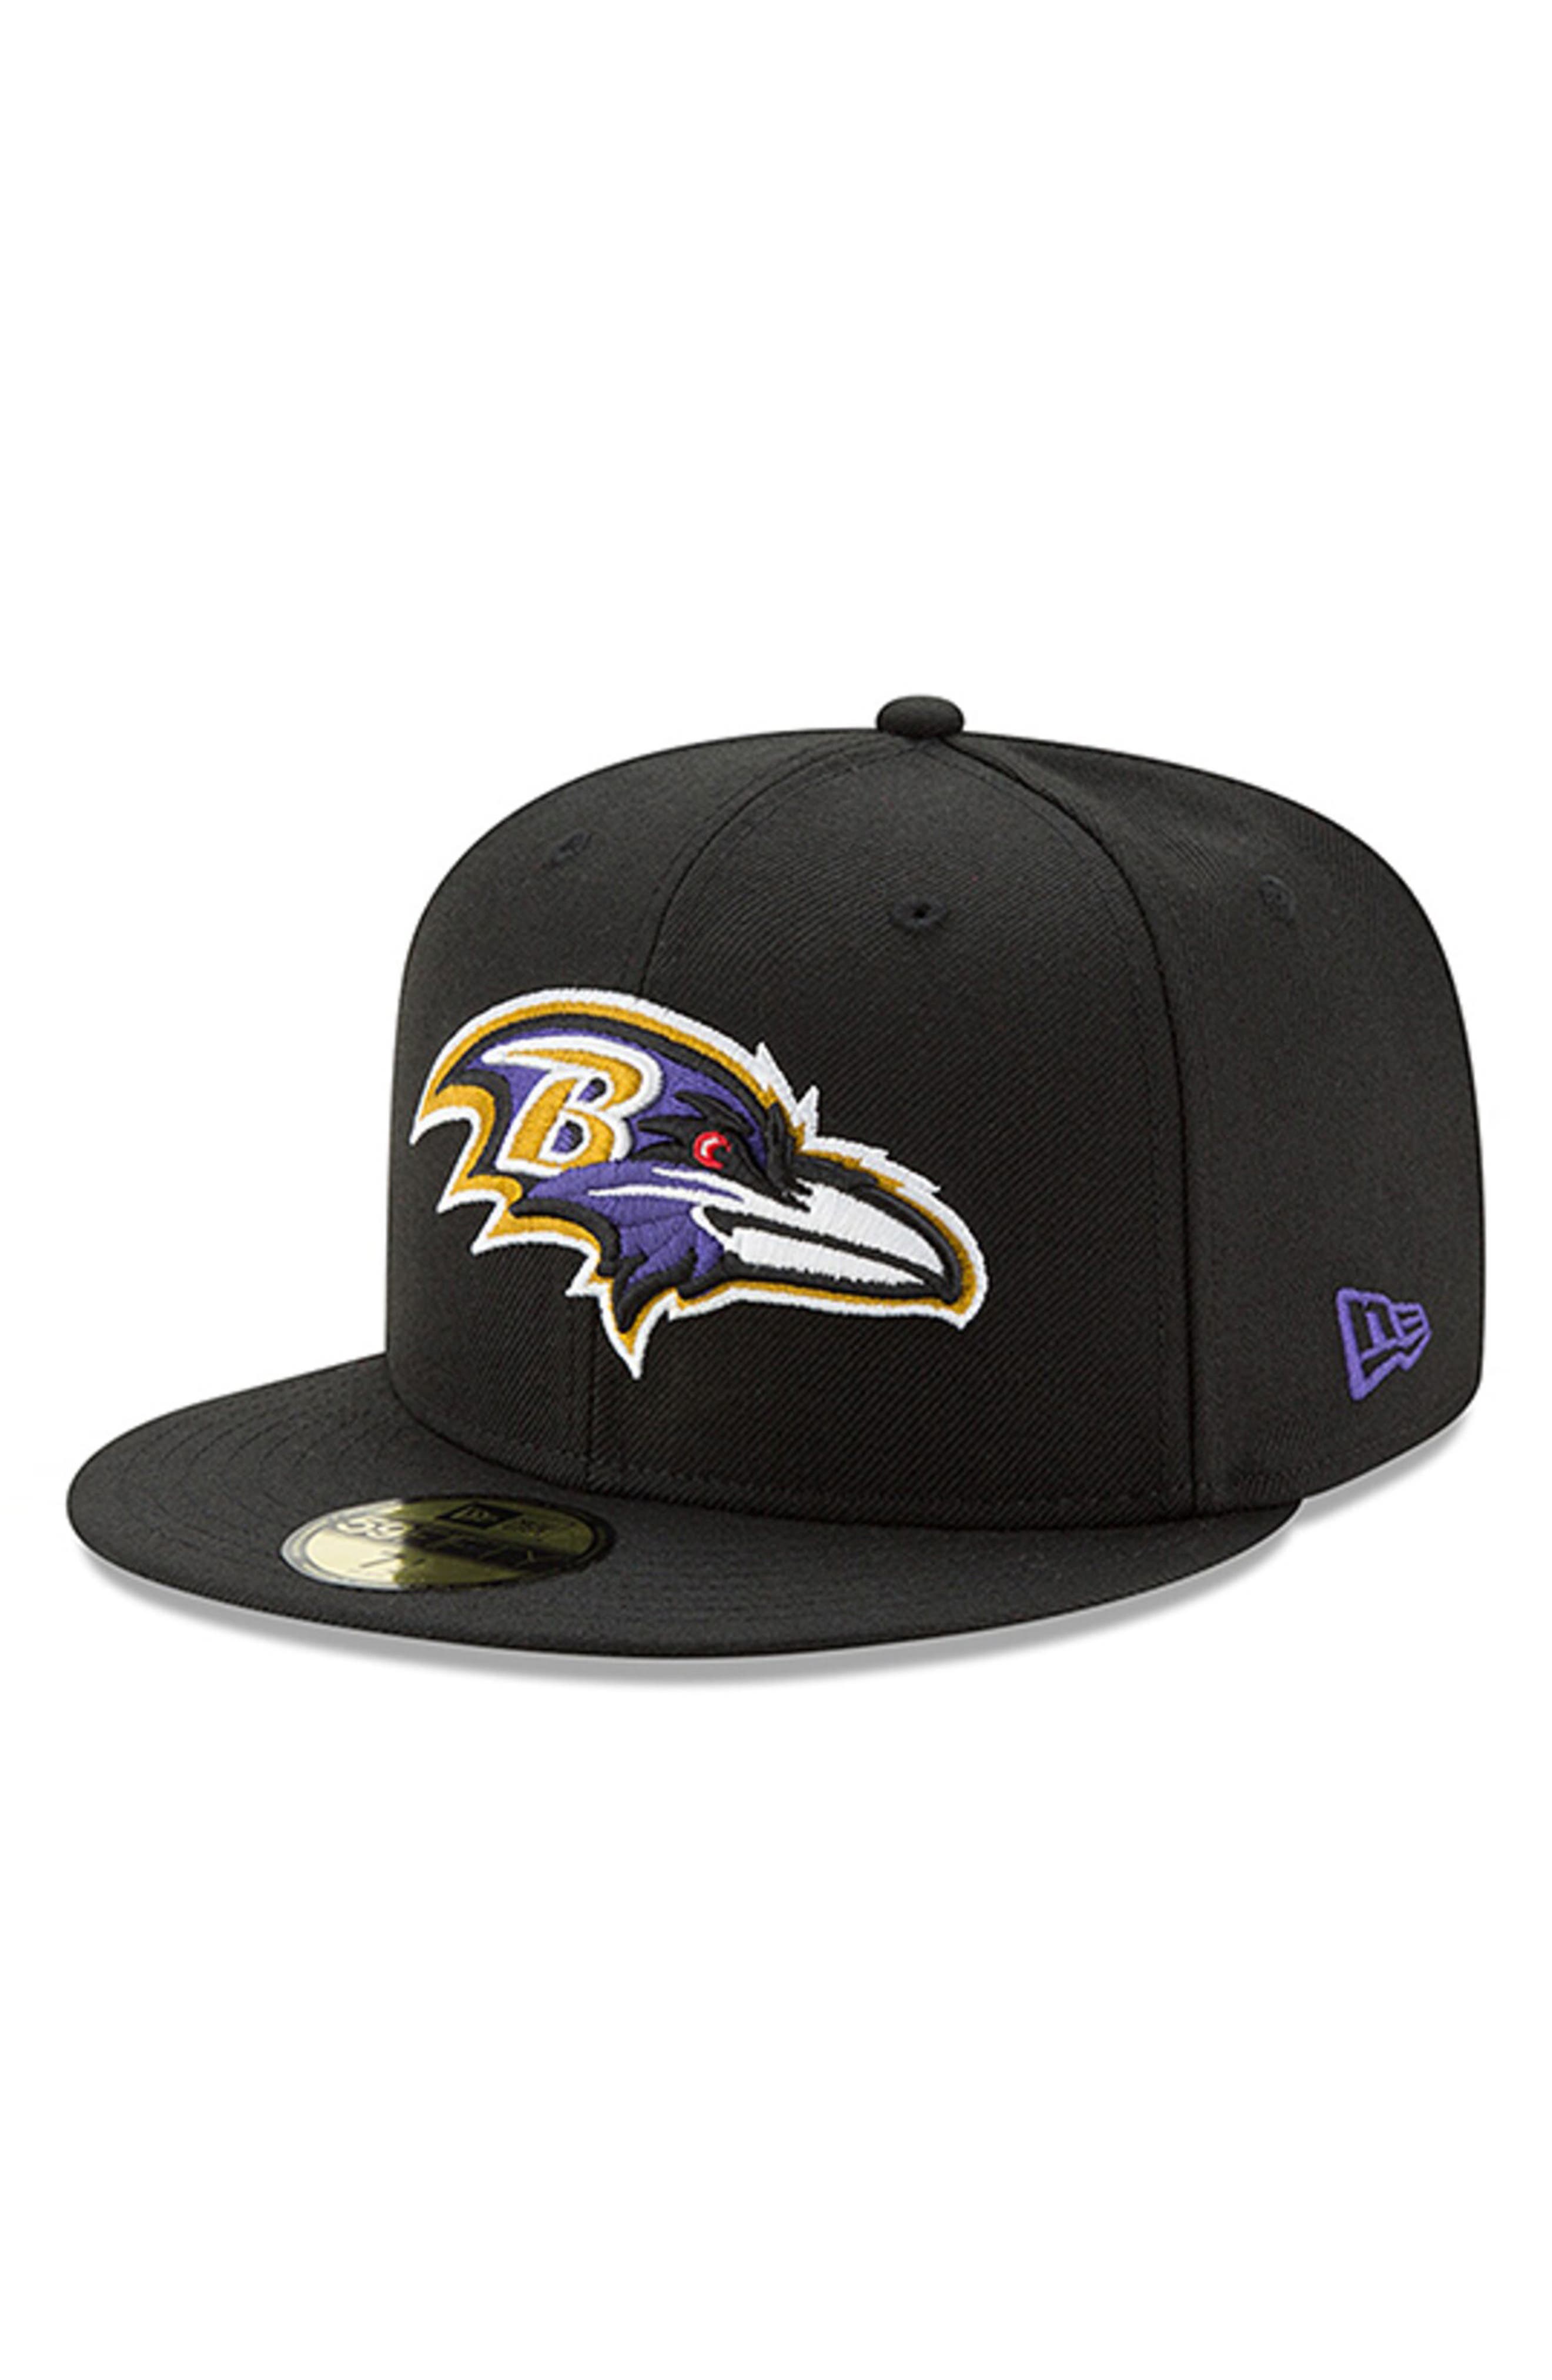 baltimore ravens fitted hats